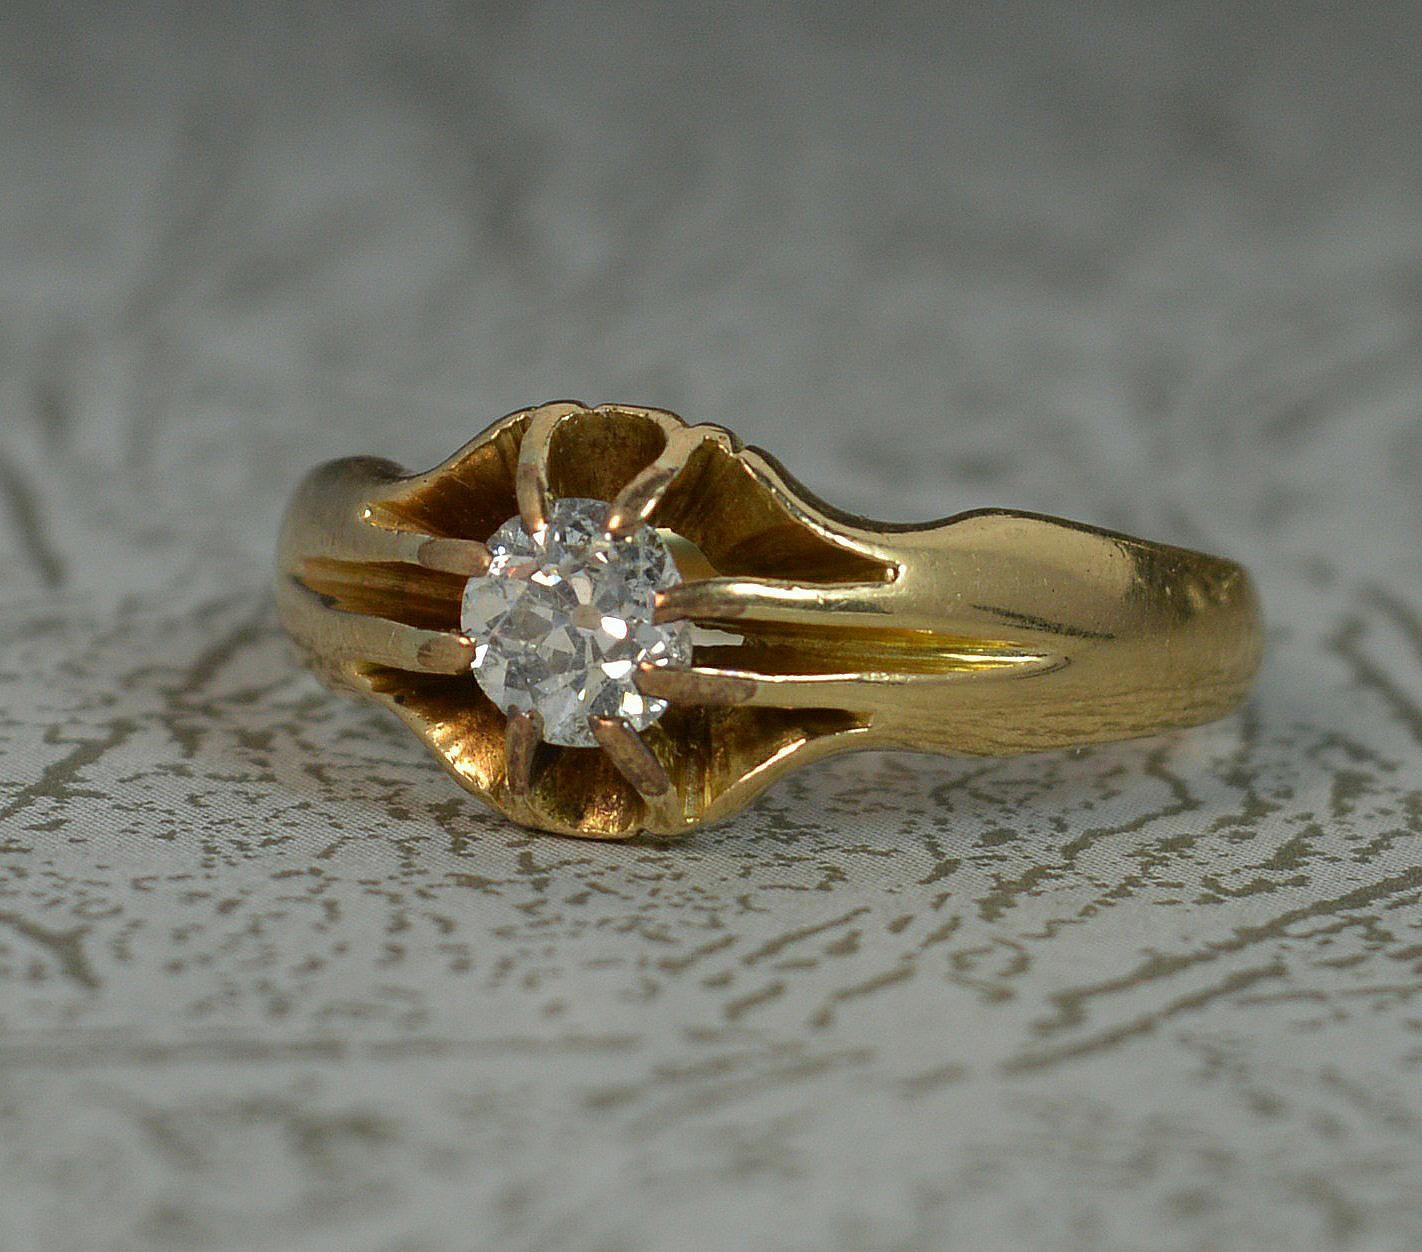 Antique 18 Carat Gold 0.5 Carat Old Cut Diamond Solitaire Gypsy Ring 1